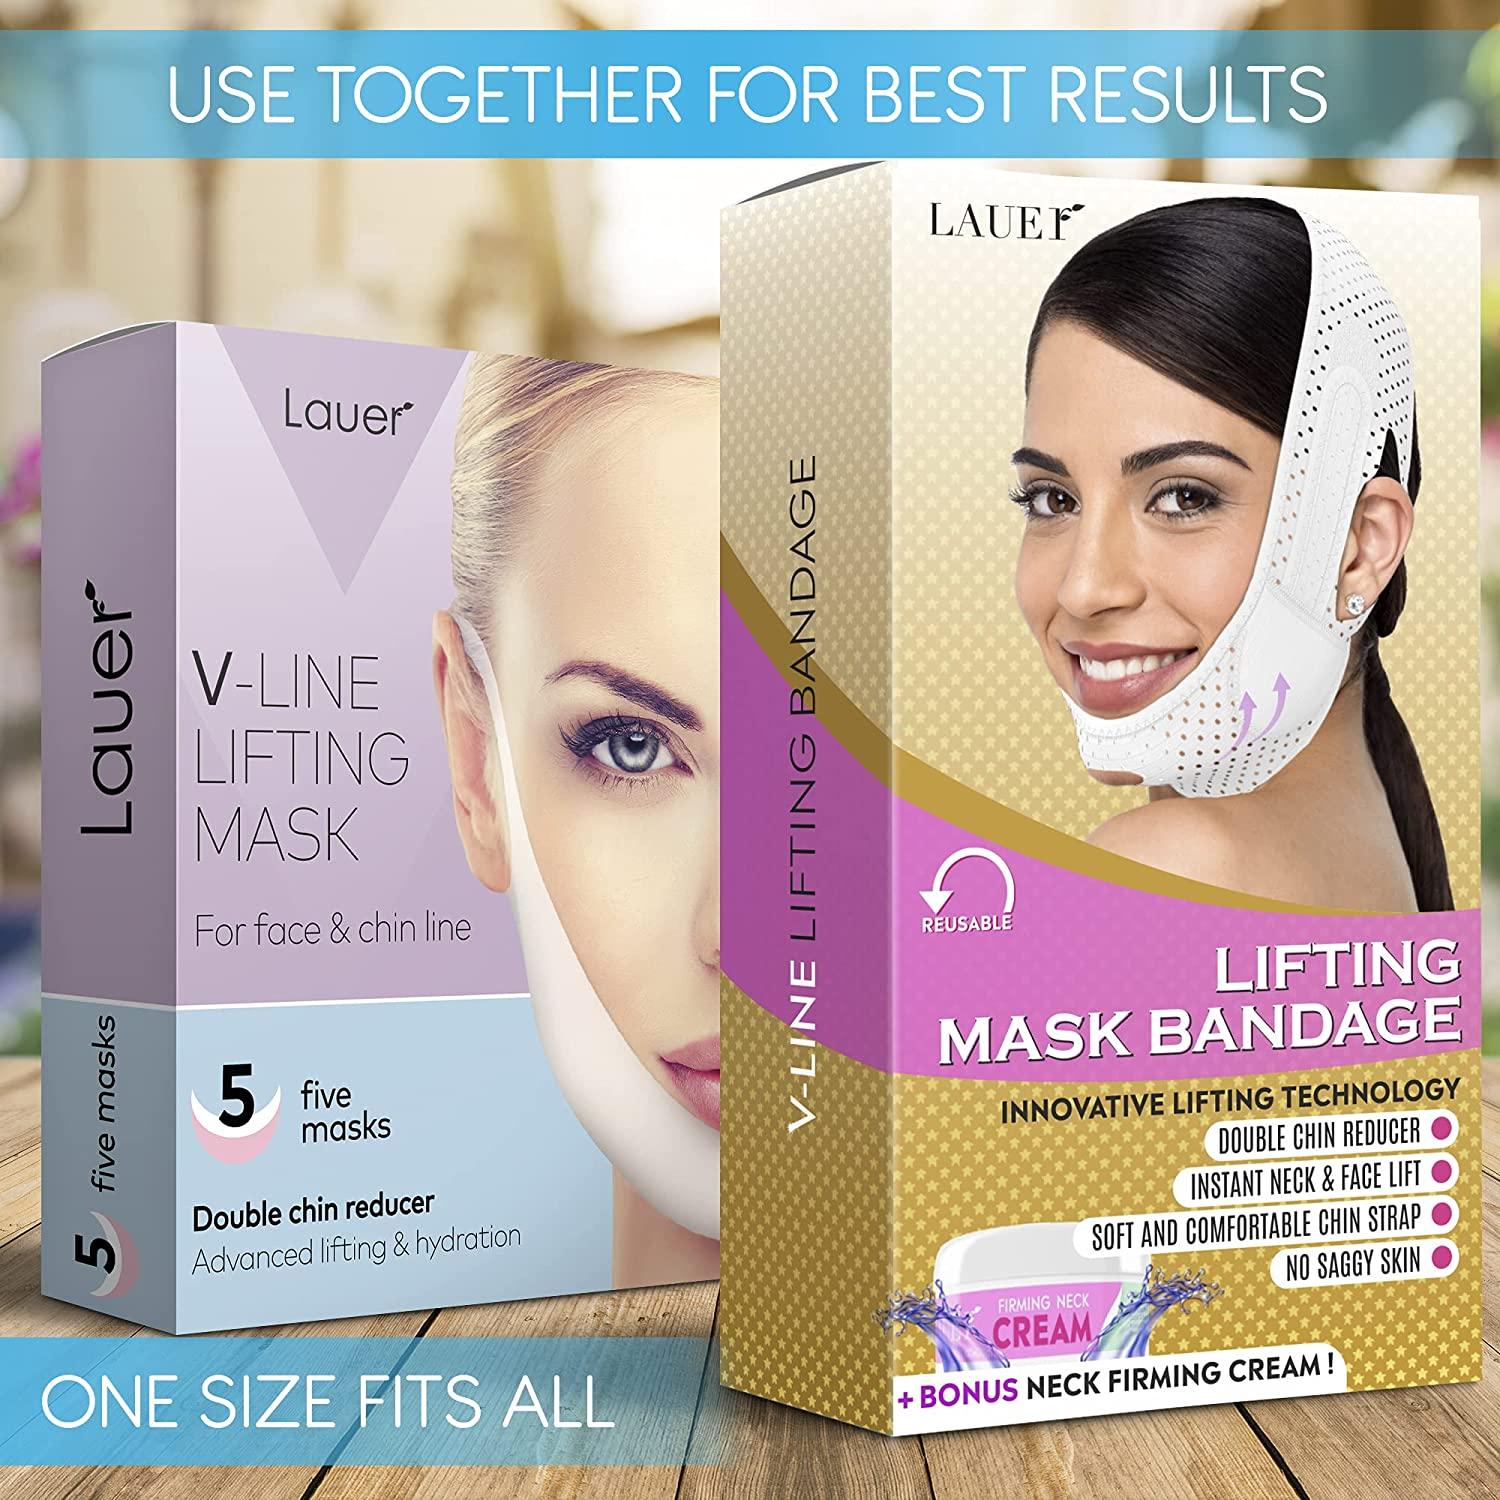 Lauer V-Line Lifting Mask - 5 Pieces for sale online